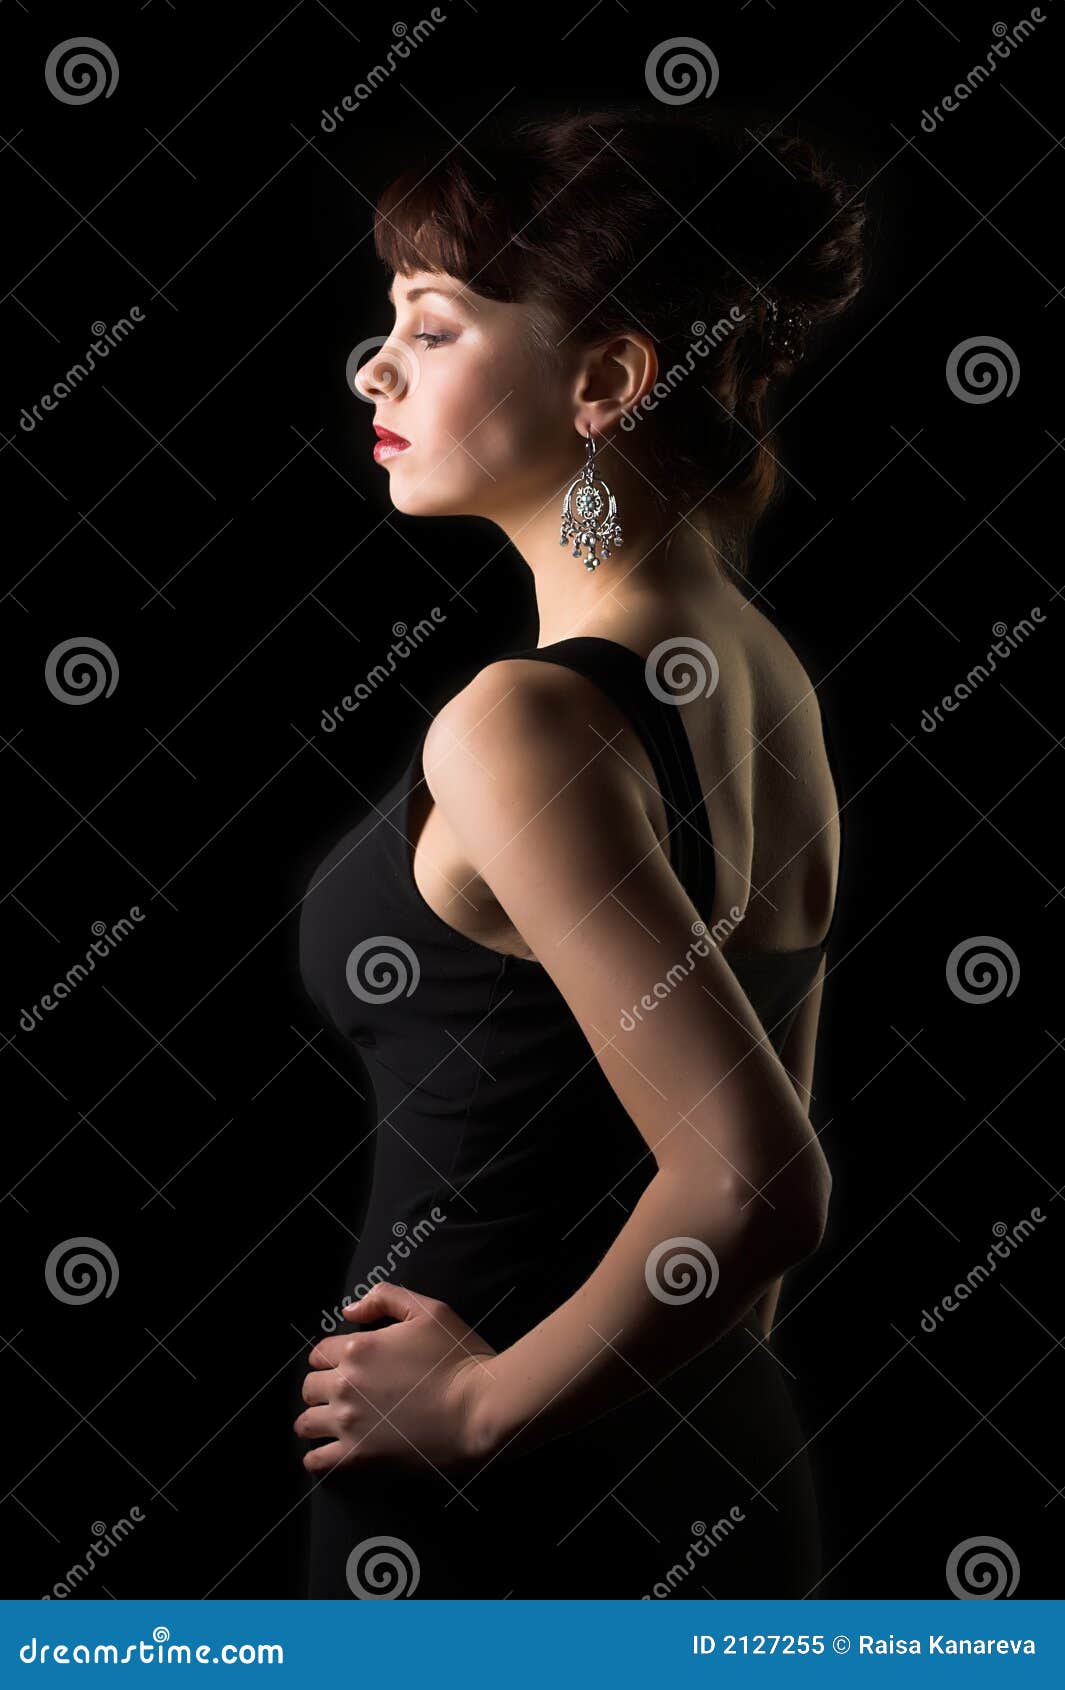 Glamorous woman stock image. Image of attractive, exotic - 2127255